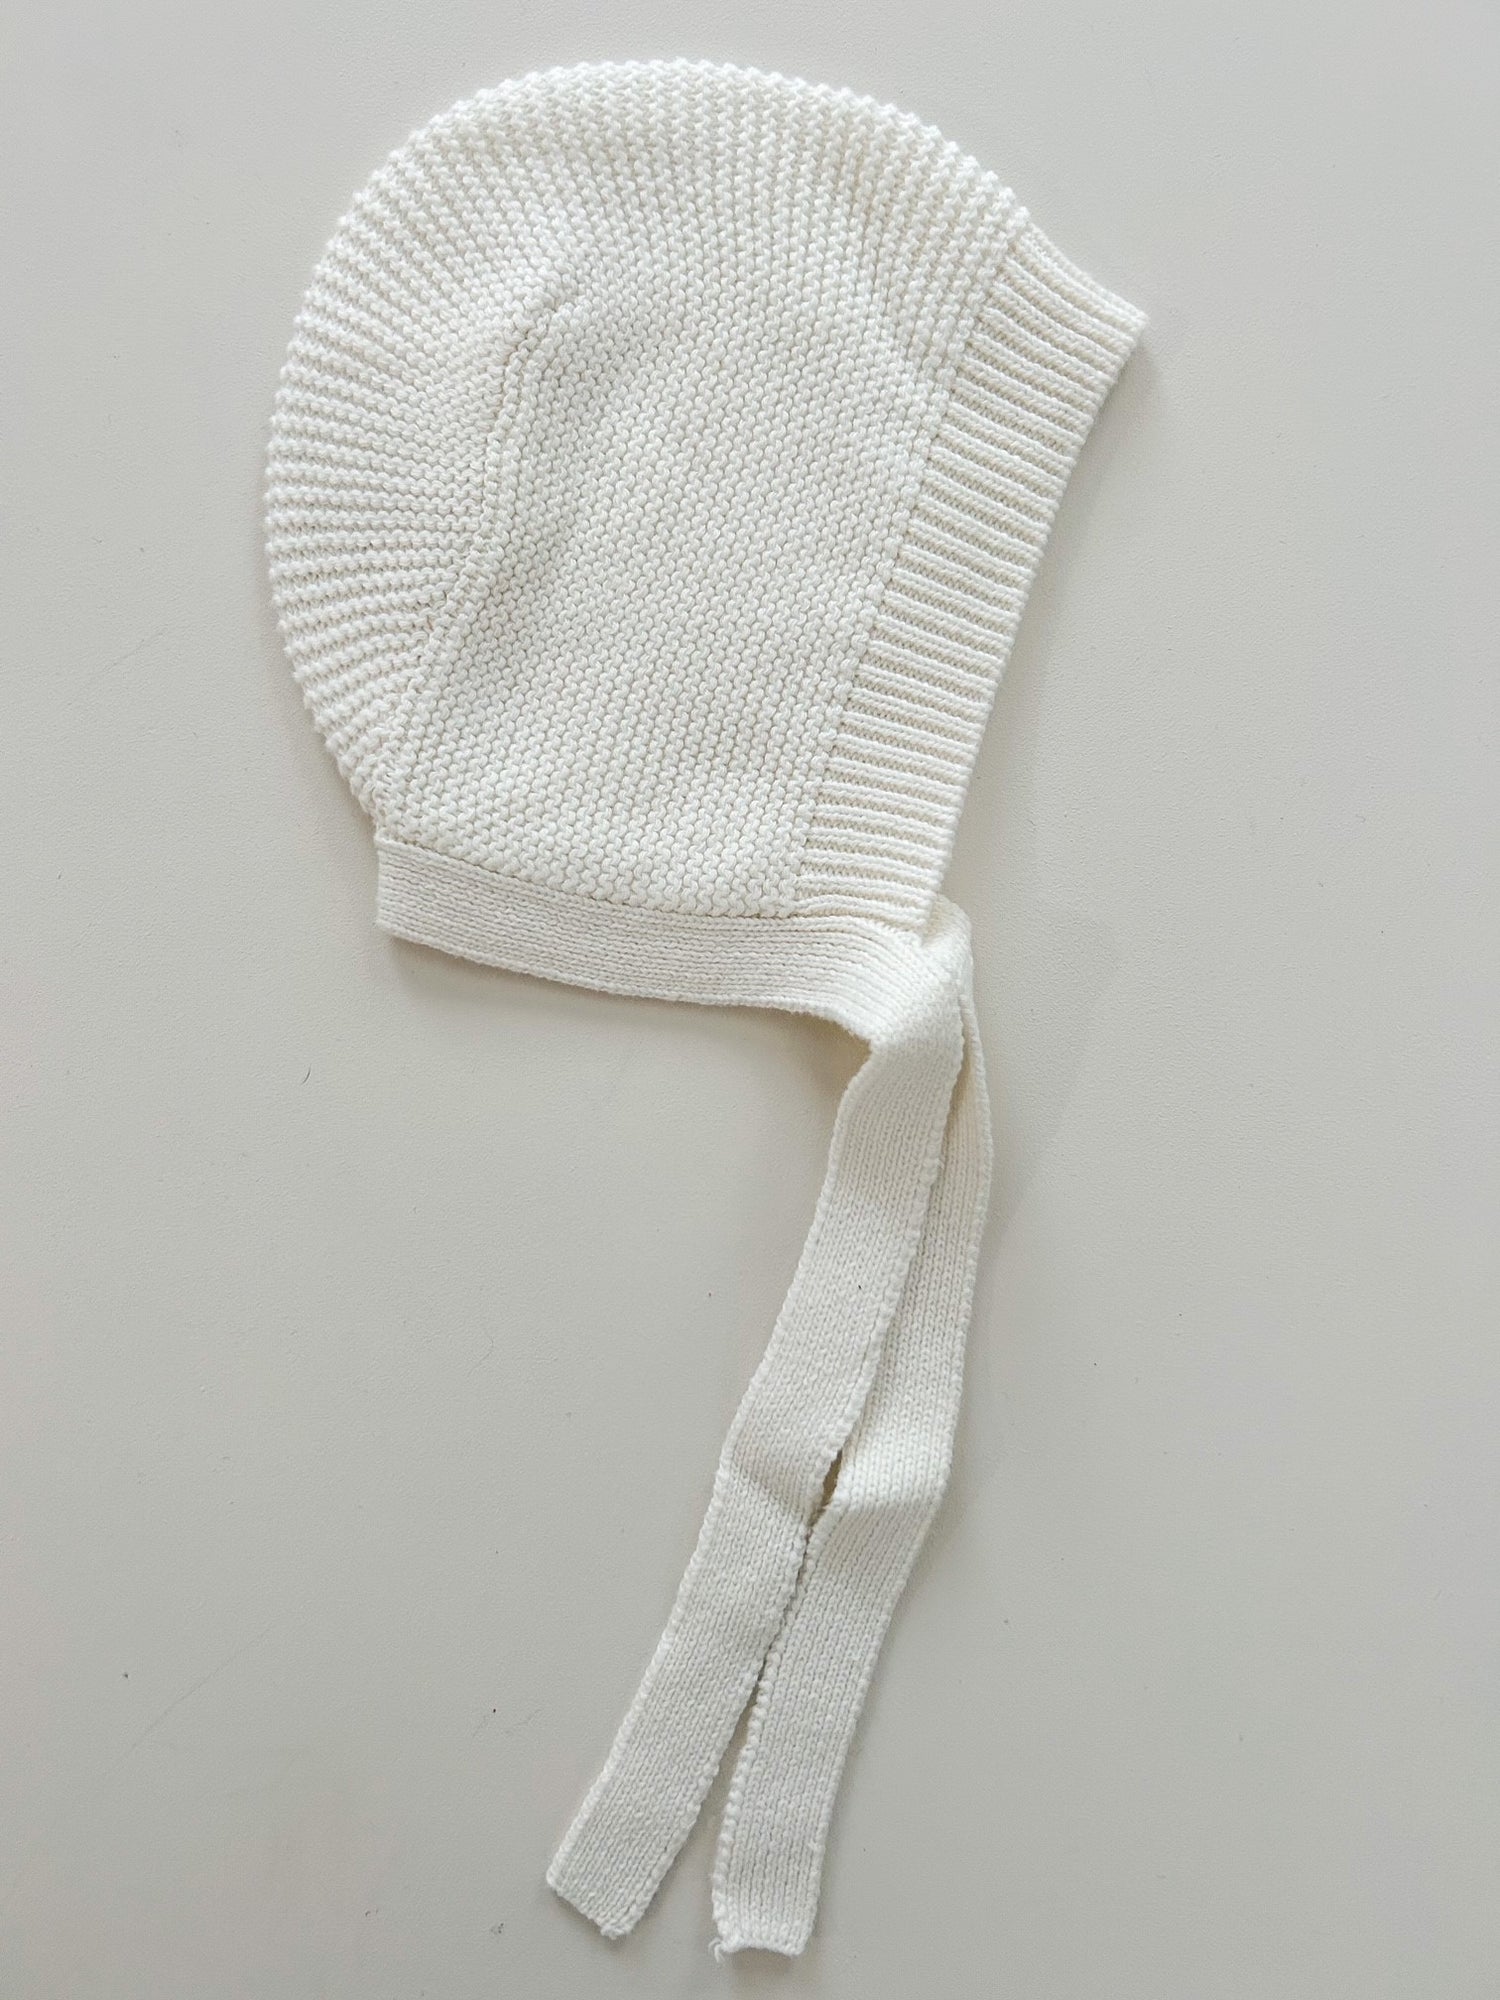 RIBBED BABY BONNET